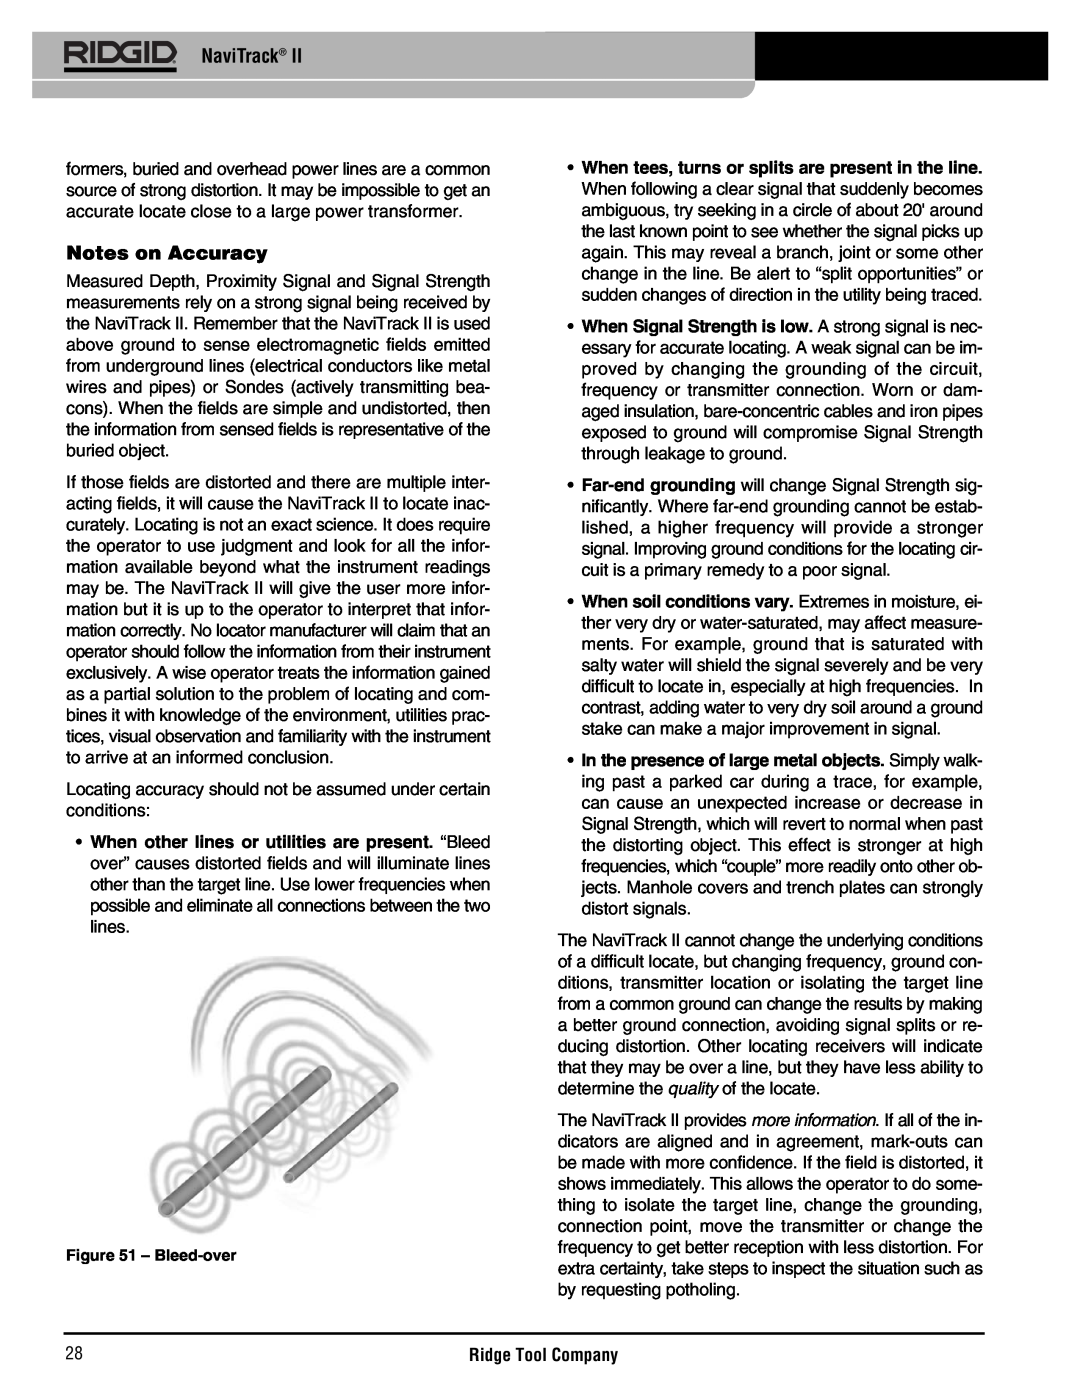 RIDGID Metal Detector manual Notes on Accuracy, NaviTrack, Locating accuracy should not be assumed under certain conditions 